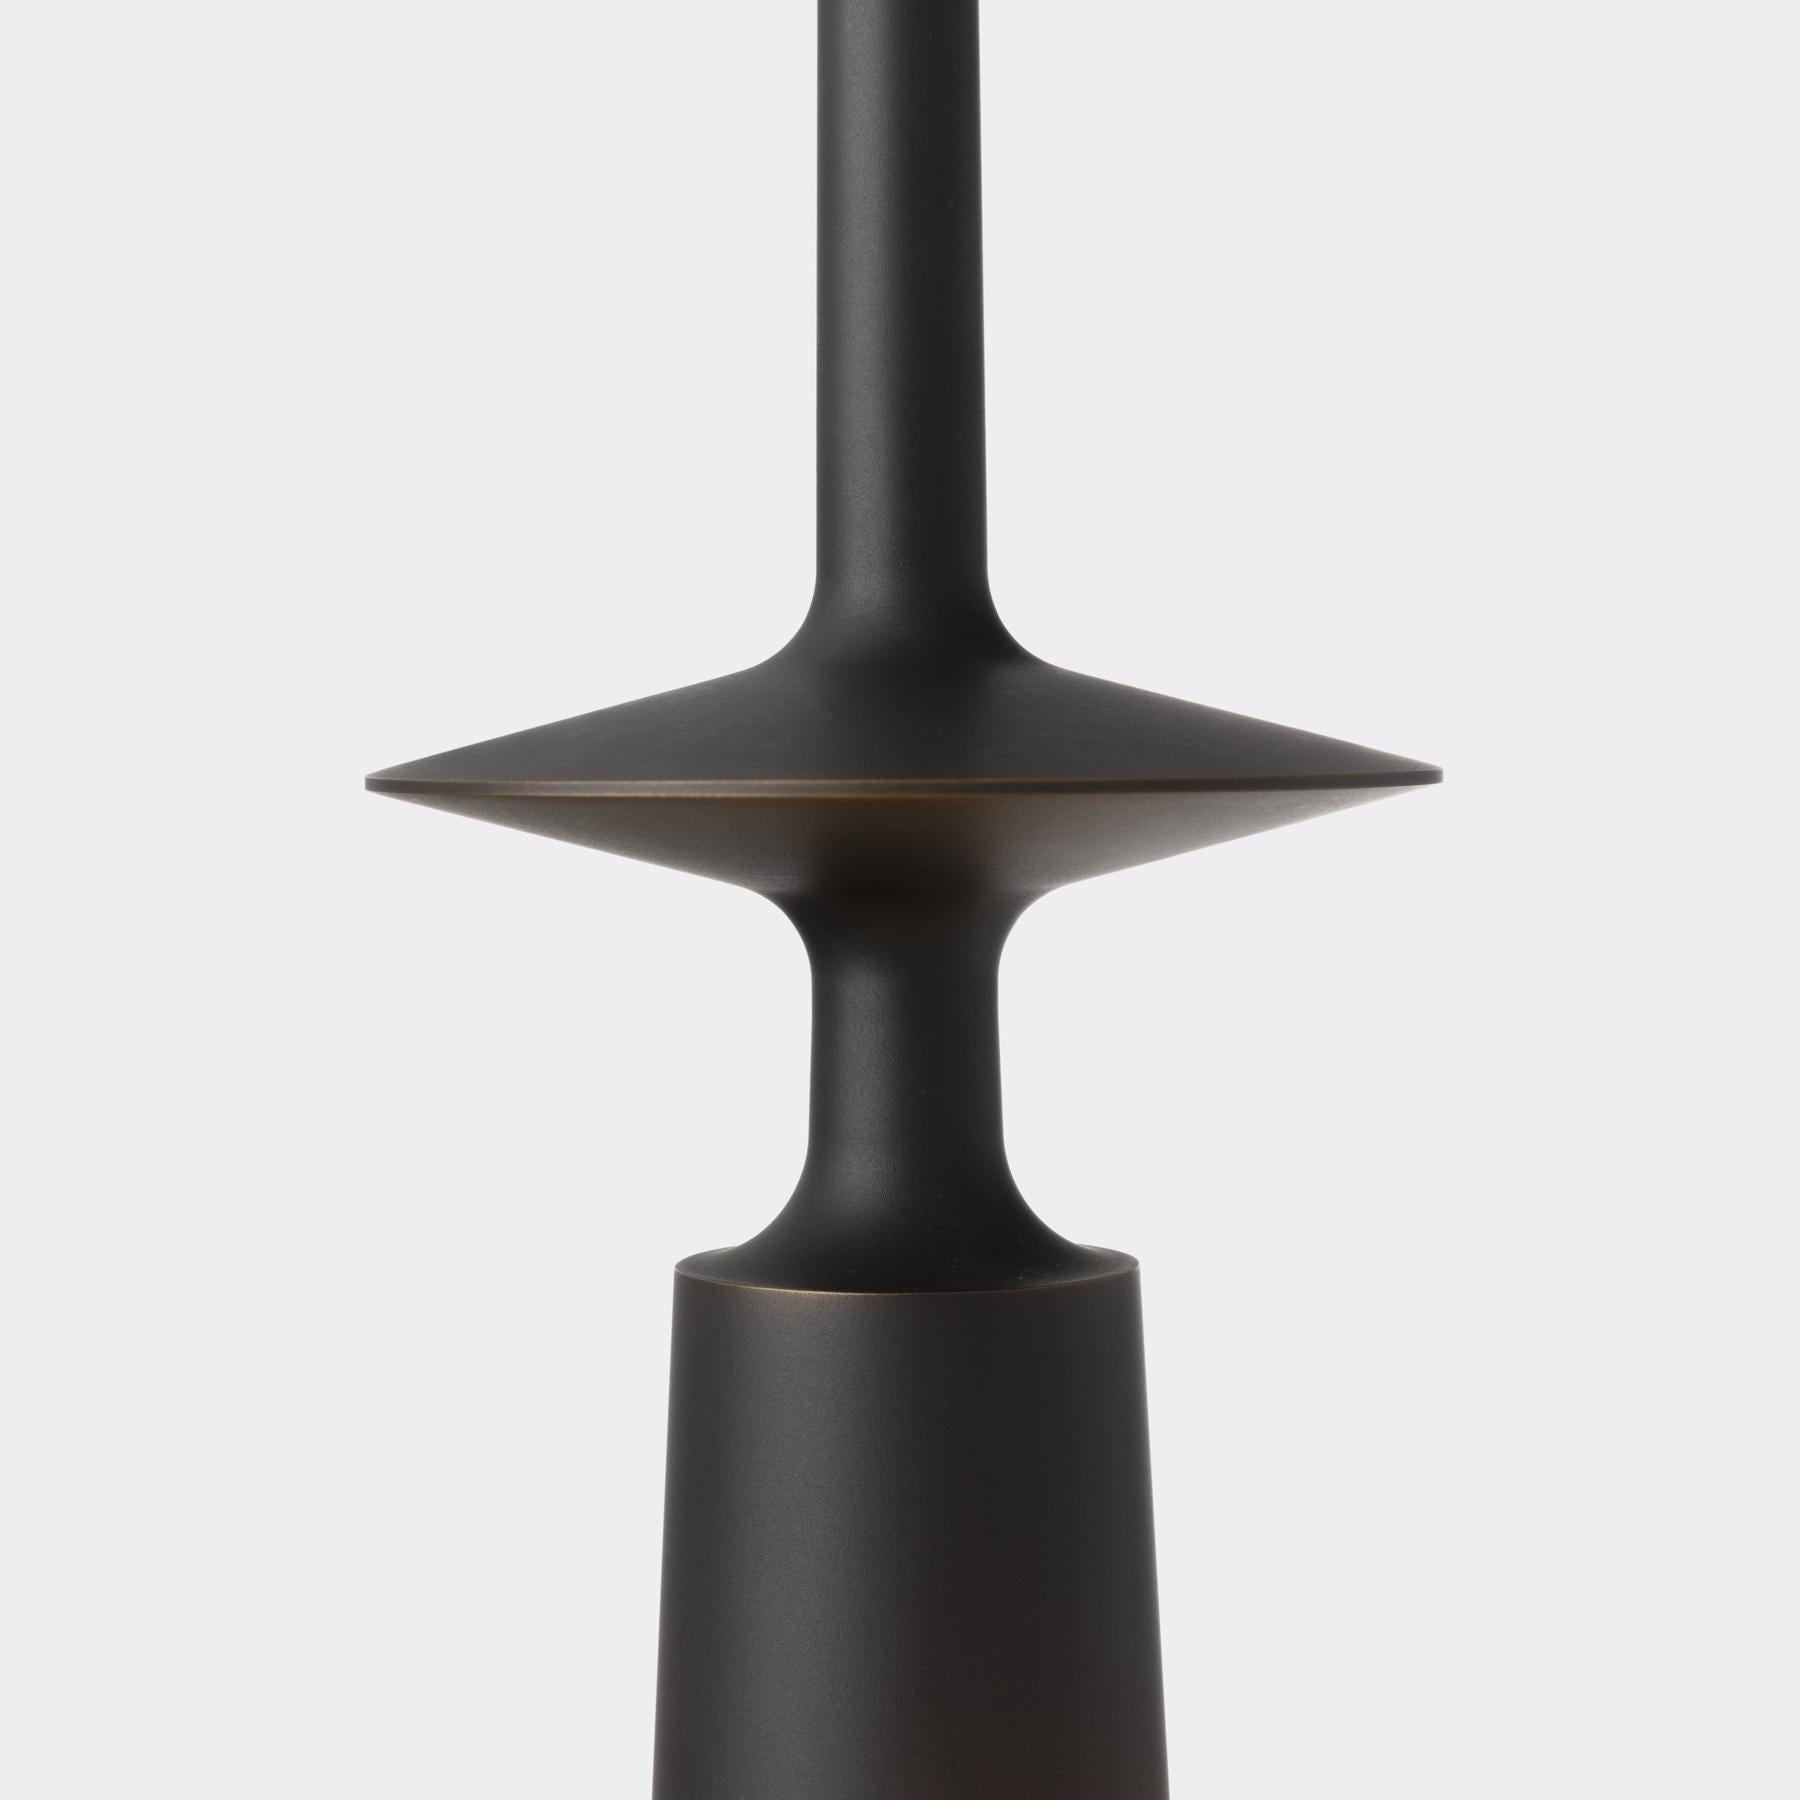 Our Summit Pendant has a stylish personality. Its seemingly simple form showcases the beauty of machined metal, and acts to cast light both up and down.